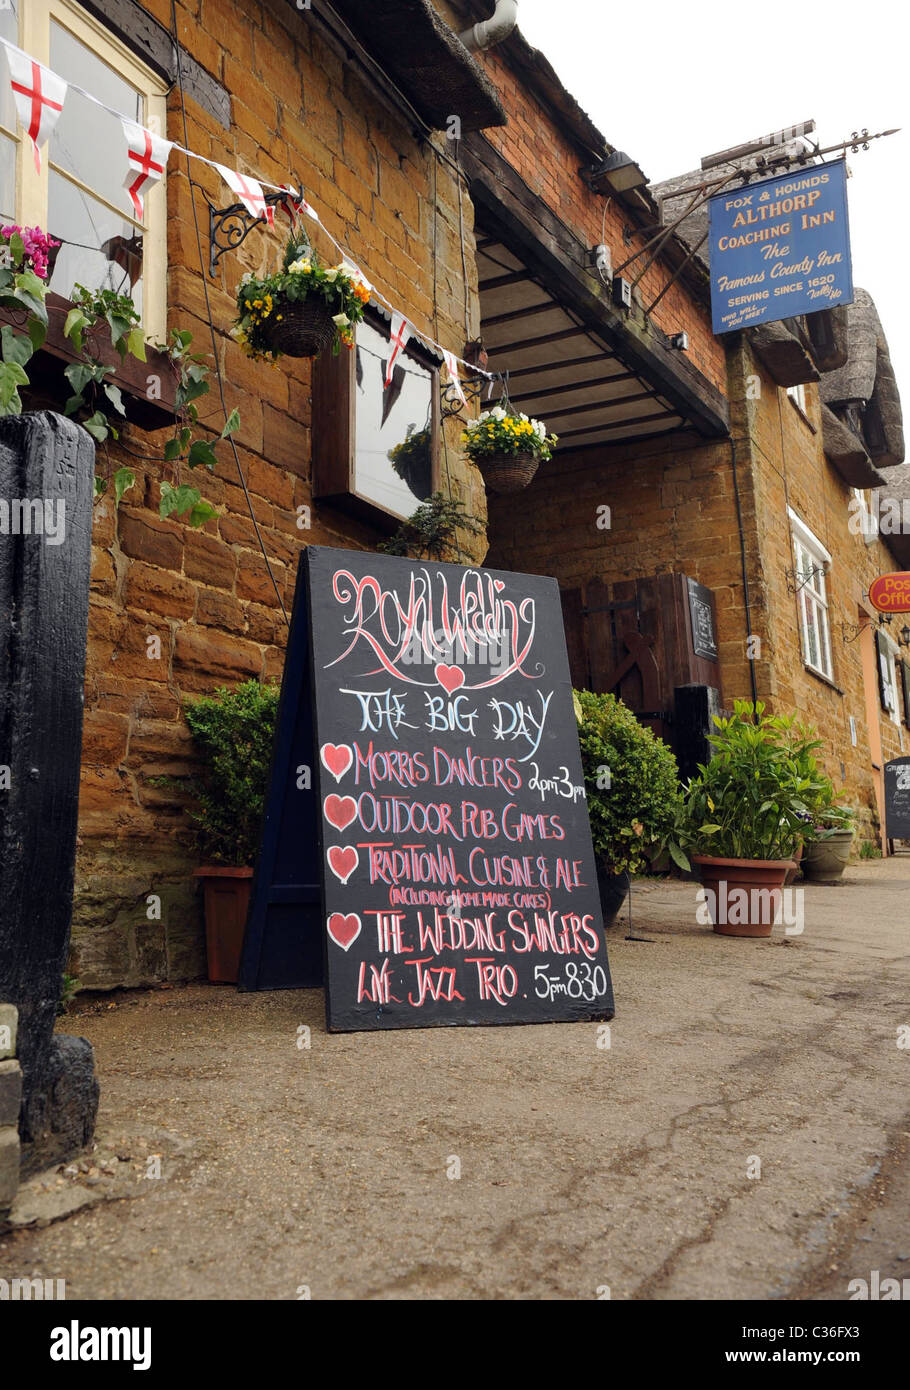 The Wedding of Prince William and Catherine Middleton. 29th April 2011. The Fox and Hounds Althorp Pub ready for the big day on Stock Photo